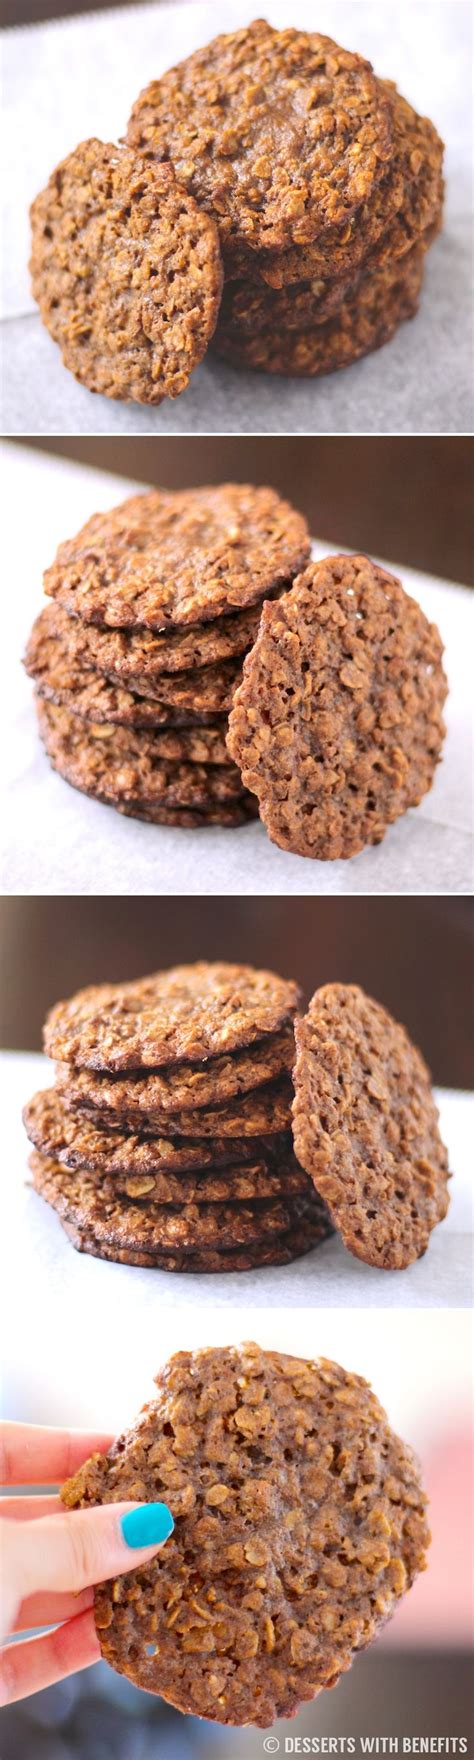 I've been going through our family's stash of recipes and came across my grandmother's oatmeal cookie recipe. Healthy Thin and Chewy Peanut Butter Oatmeal Cookies ...